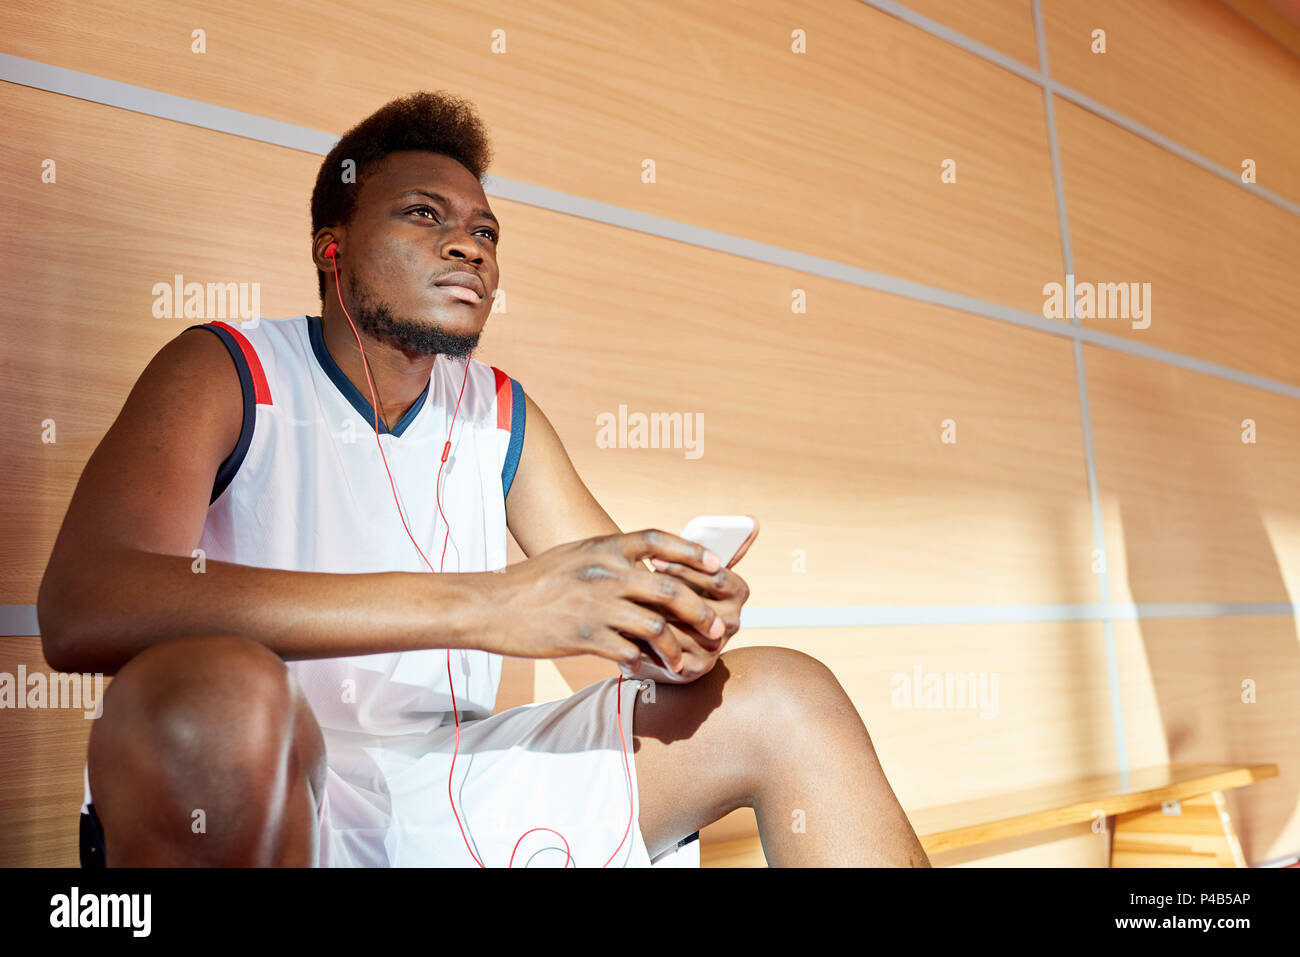 African-American athlete listening to music in gym Stock Photo